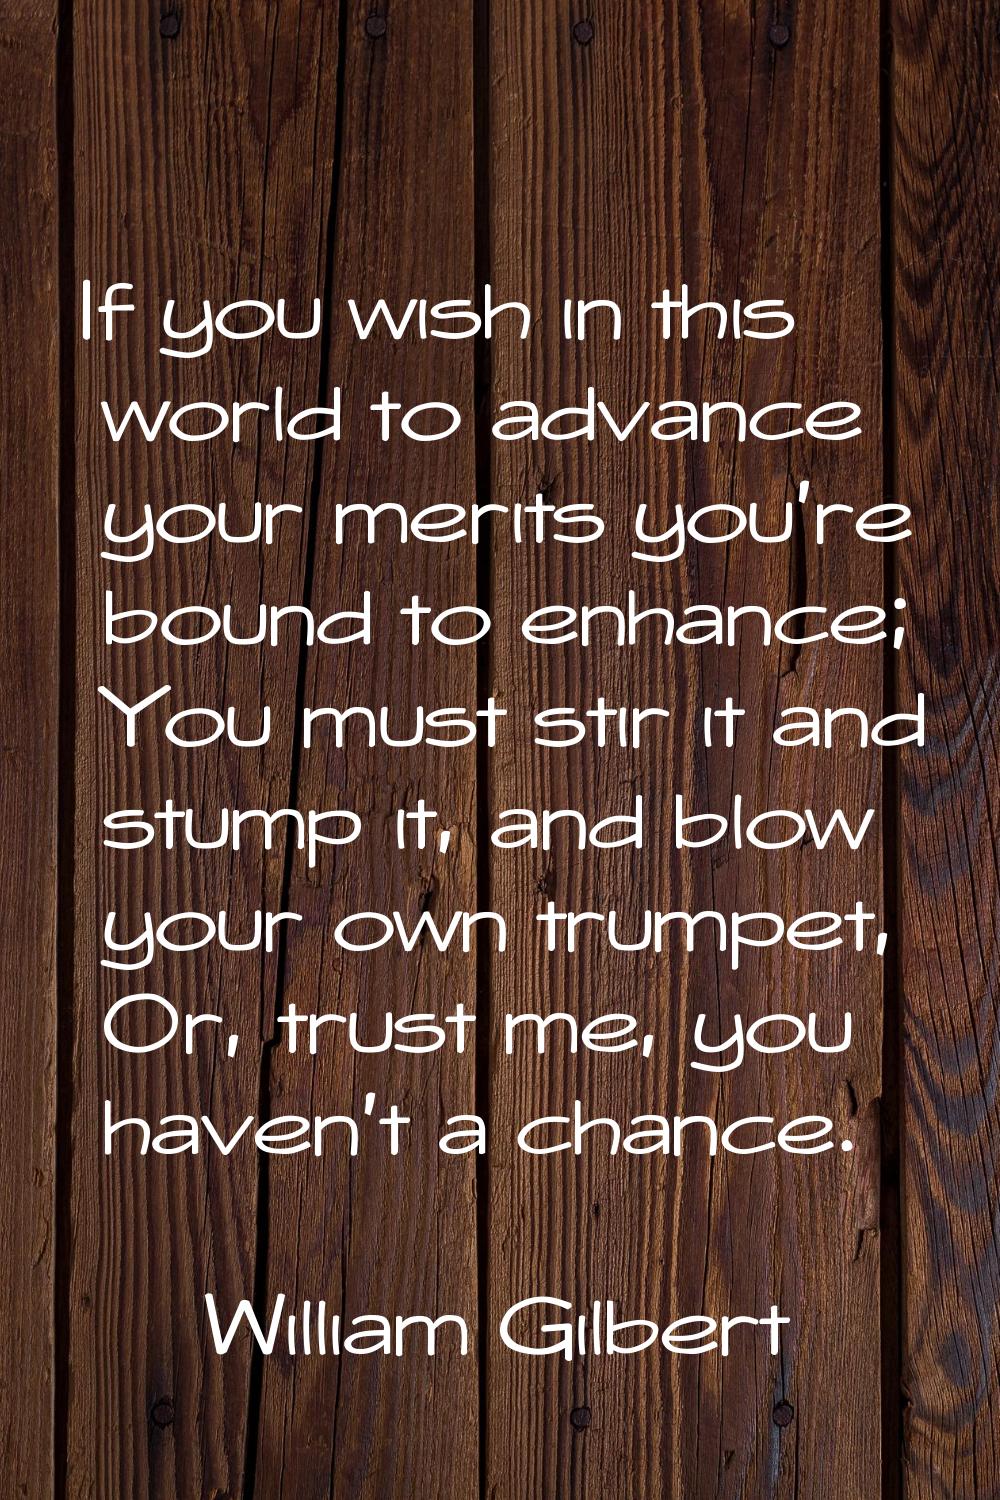 If you wish in this world to advance your merits you're bound to enhance; You must stir it and stum